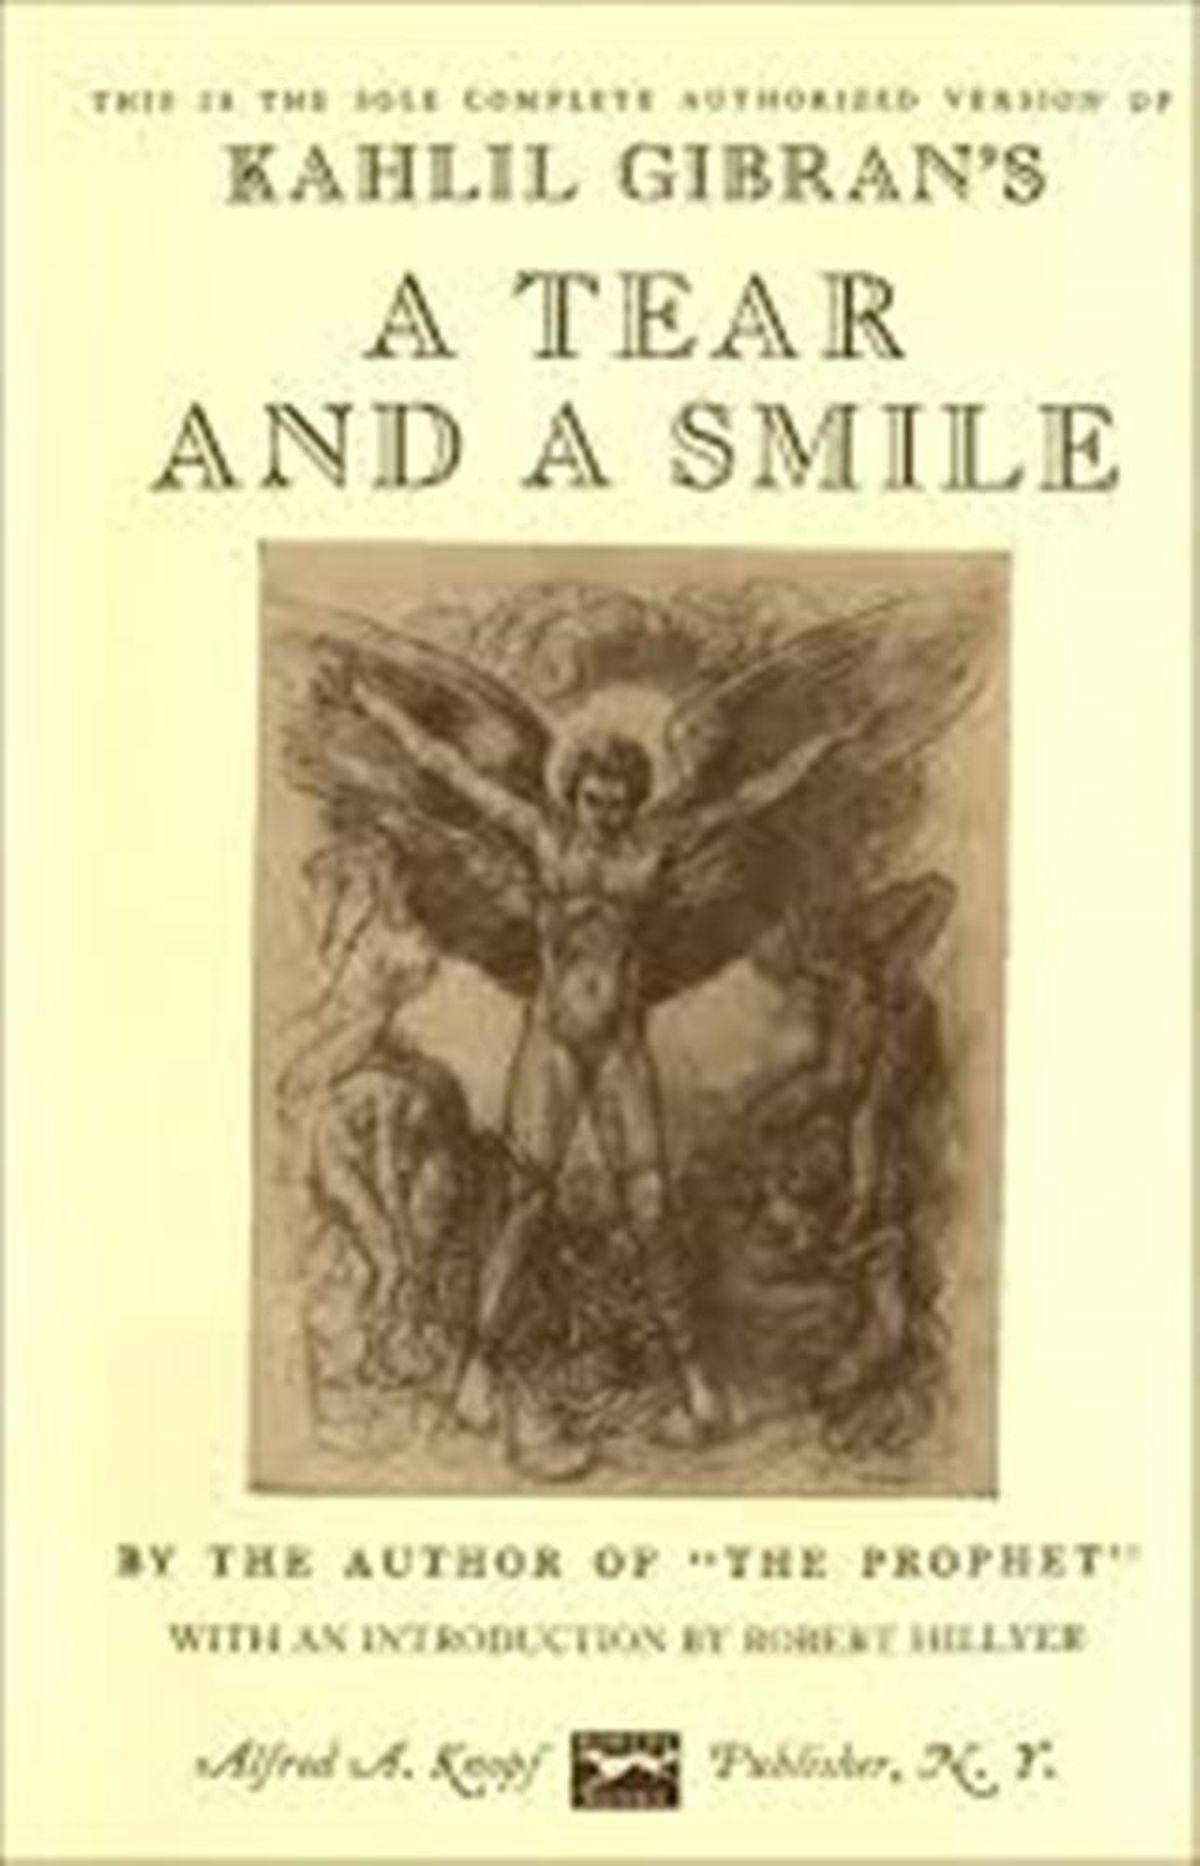 K. Gibran, A Tear and a Smile, Translated from the Arabic by H.M. Nahmad, With an Introduction by Robert Hillyer, New York: Knopf, 1950.